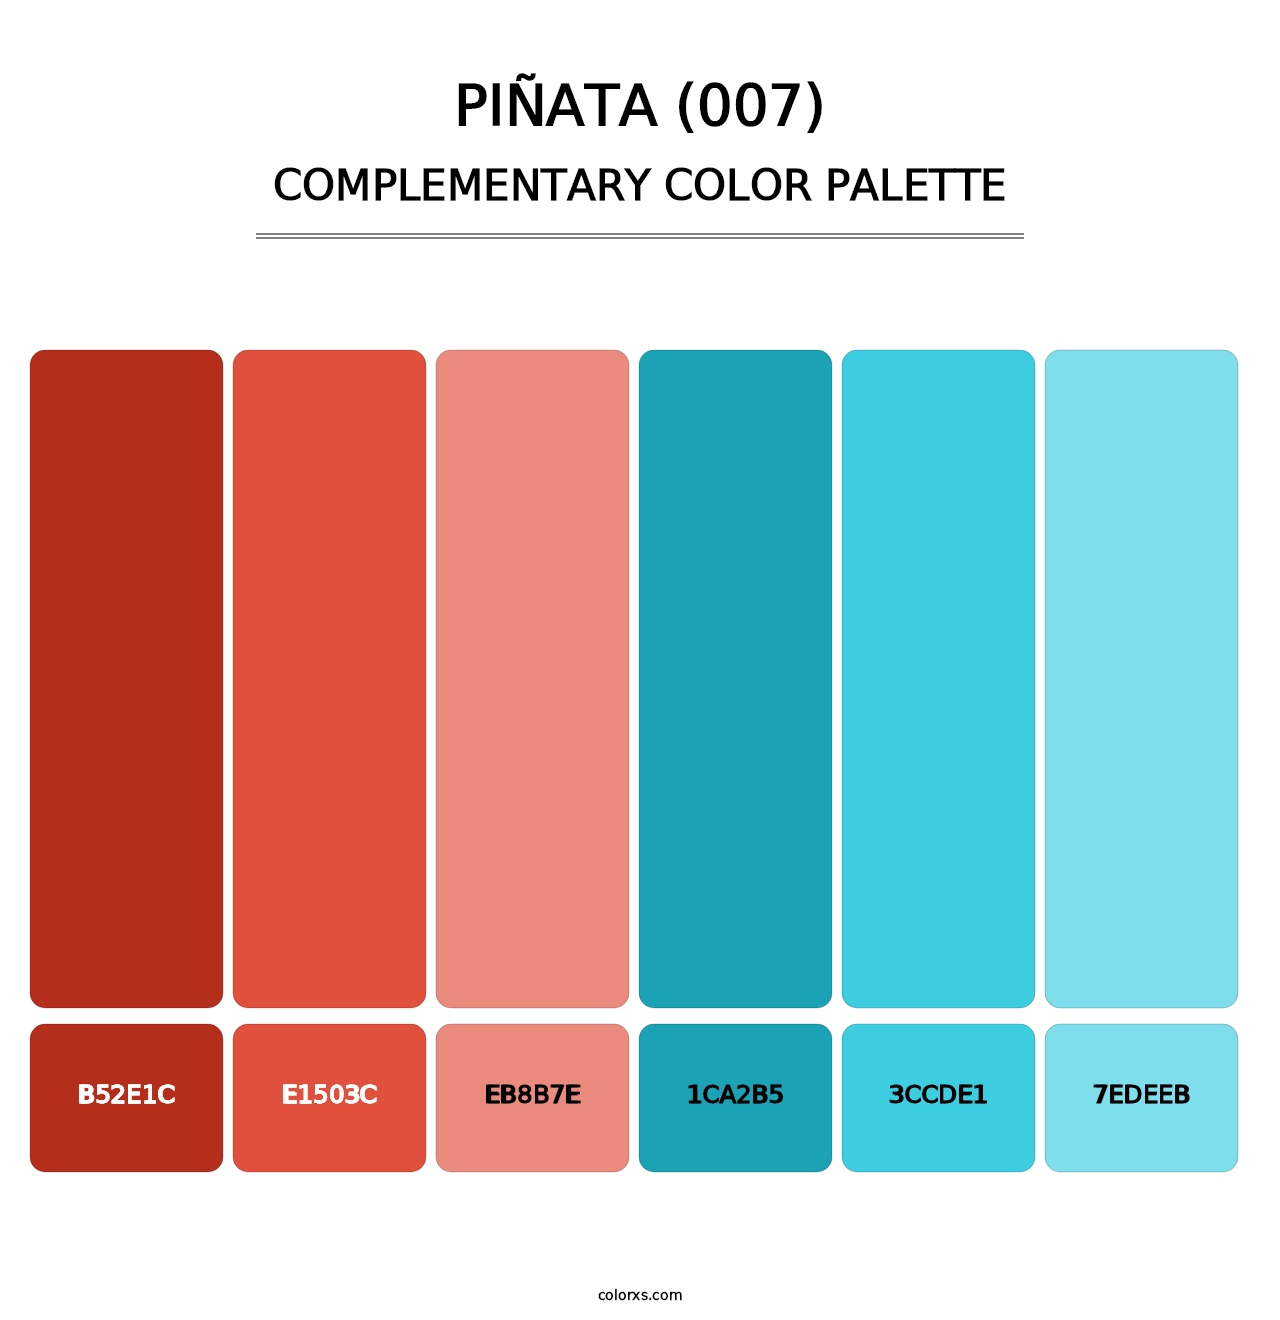 Piñata (007) - Complementary Color Palette